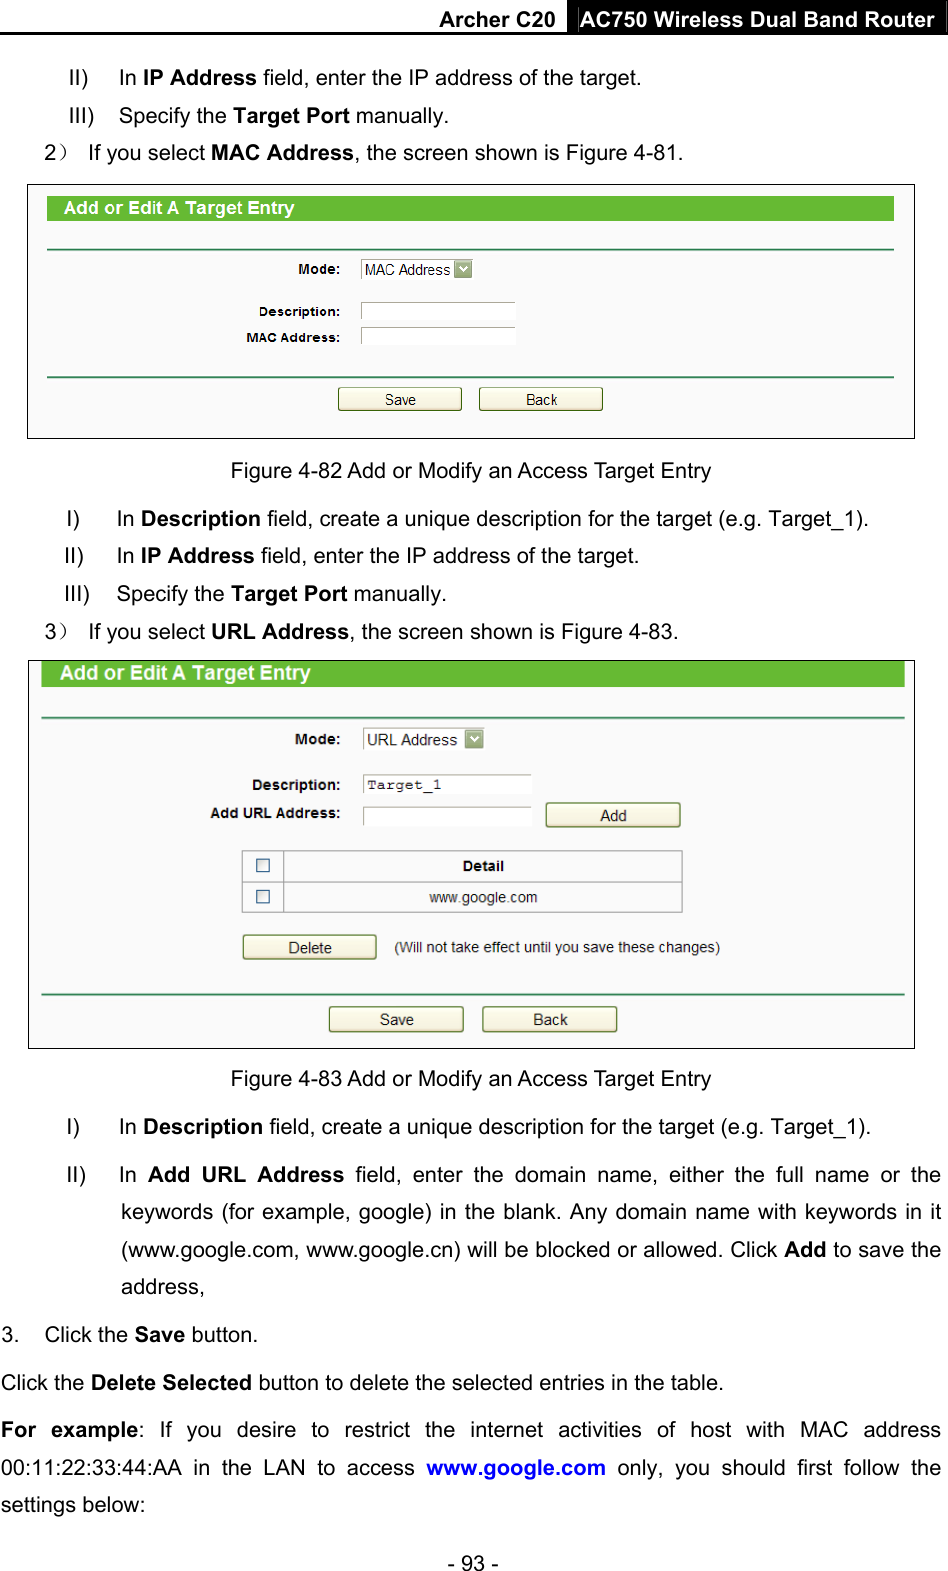 Archer C20 AC750 Wireless Dual Band Router - 93 - II) In IP Address field, enter the IP address of the target. III) Specify the Target Port manually. 2）  If you select MAC Address, the screen shown is Figure 4-81.   Figure 4-82 Add or Modify an Access Target Entry I) In Description field, create a unique description for the target (e.g. Target_1). II) In IP Address field, enter the IP address of the target. III) Specify the Target Port manually. 3）  If you select URL Address, the screen shown is Figure 4-83.  Figure 4-83 Add or Modify an Access Target Entry I) In Description field, create a unique description for the target (e.g. Target_1). II) In Add URL Address field, enter the domain name, either the full name or the keywords (for example, google) in the blank. Any domain name with keywords in it (www.google.com, www.google.cn) will be blocked or allowed. Click Add to save the address, 3. Click the Save button. Click the Delete Selected button to delete the selected entries in the table. For example: If you desire to restrict the internet activities of host with MAC address 00:11:22:33:44:AA in the LAN to access www.google.com only, you should first follow the settings below: 